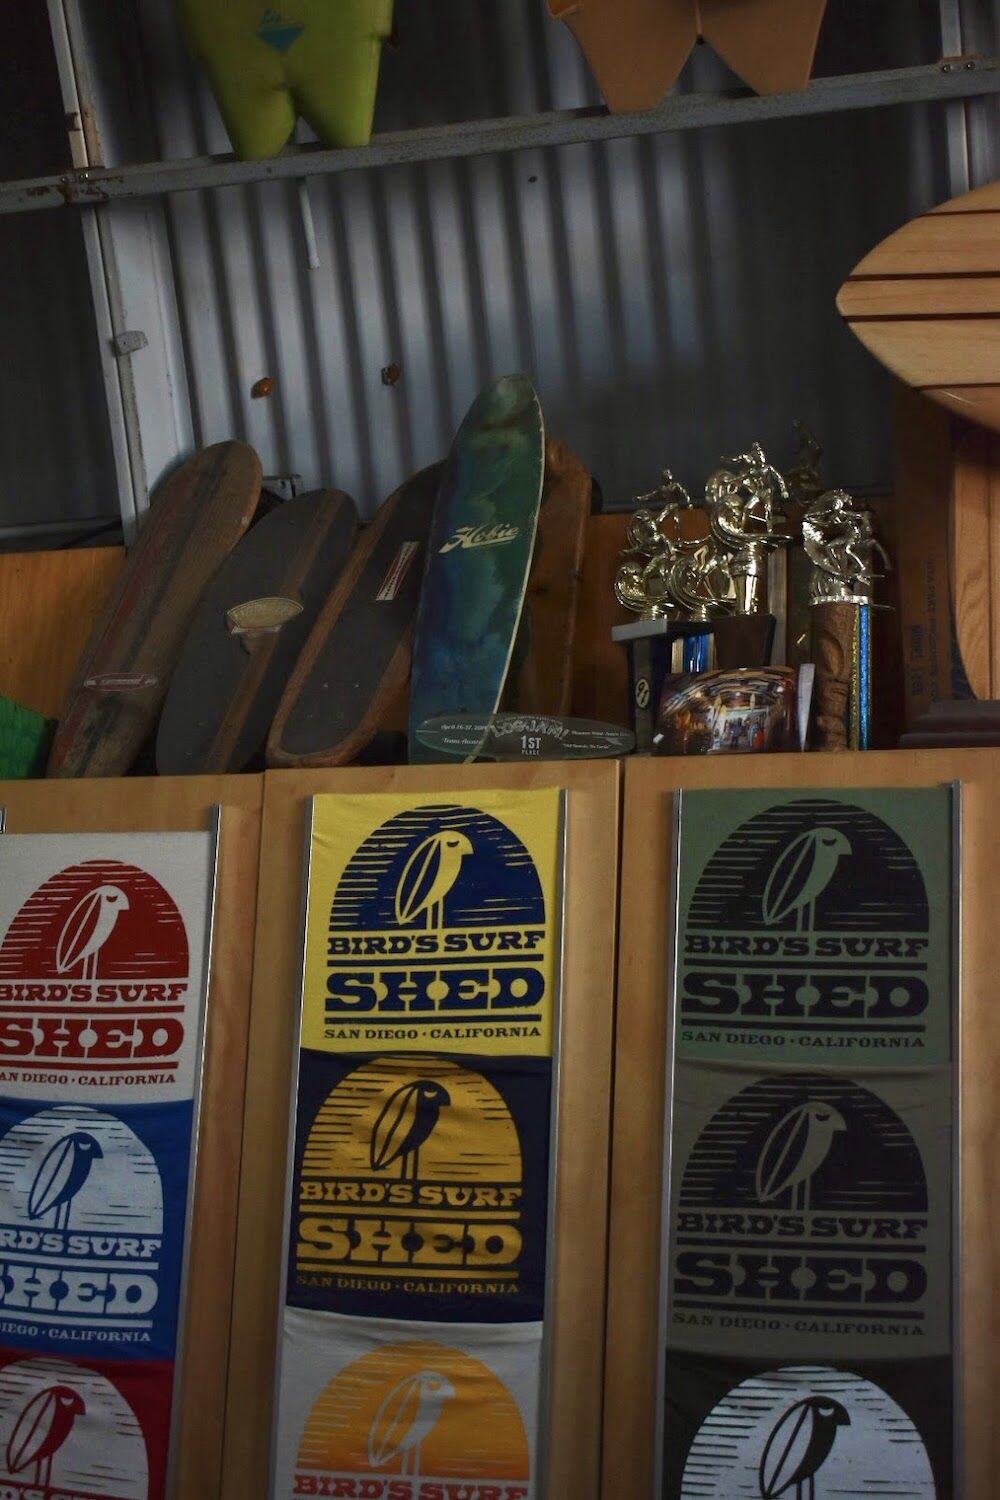 Bird's Surf Shed